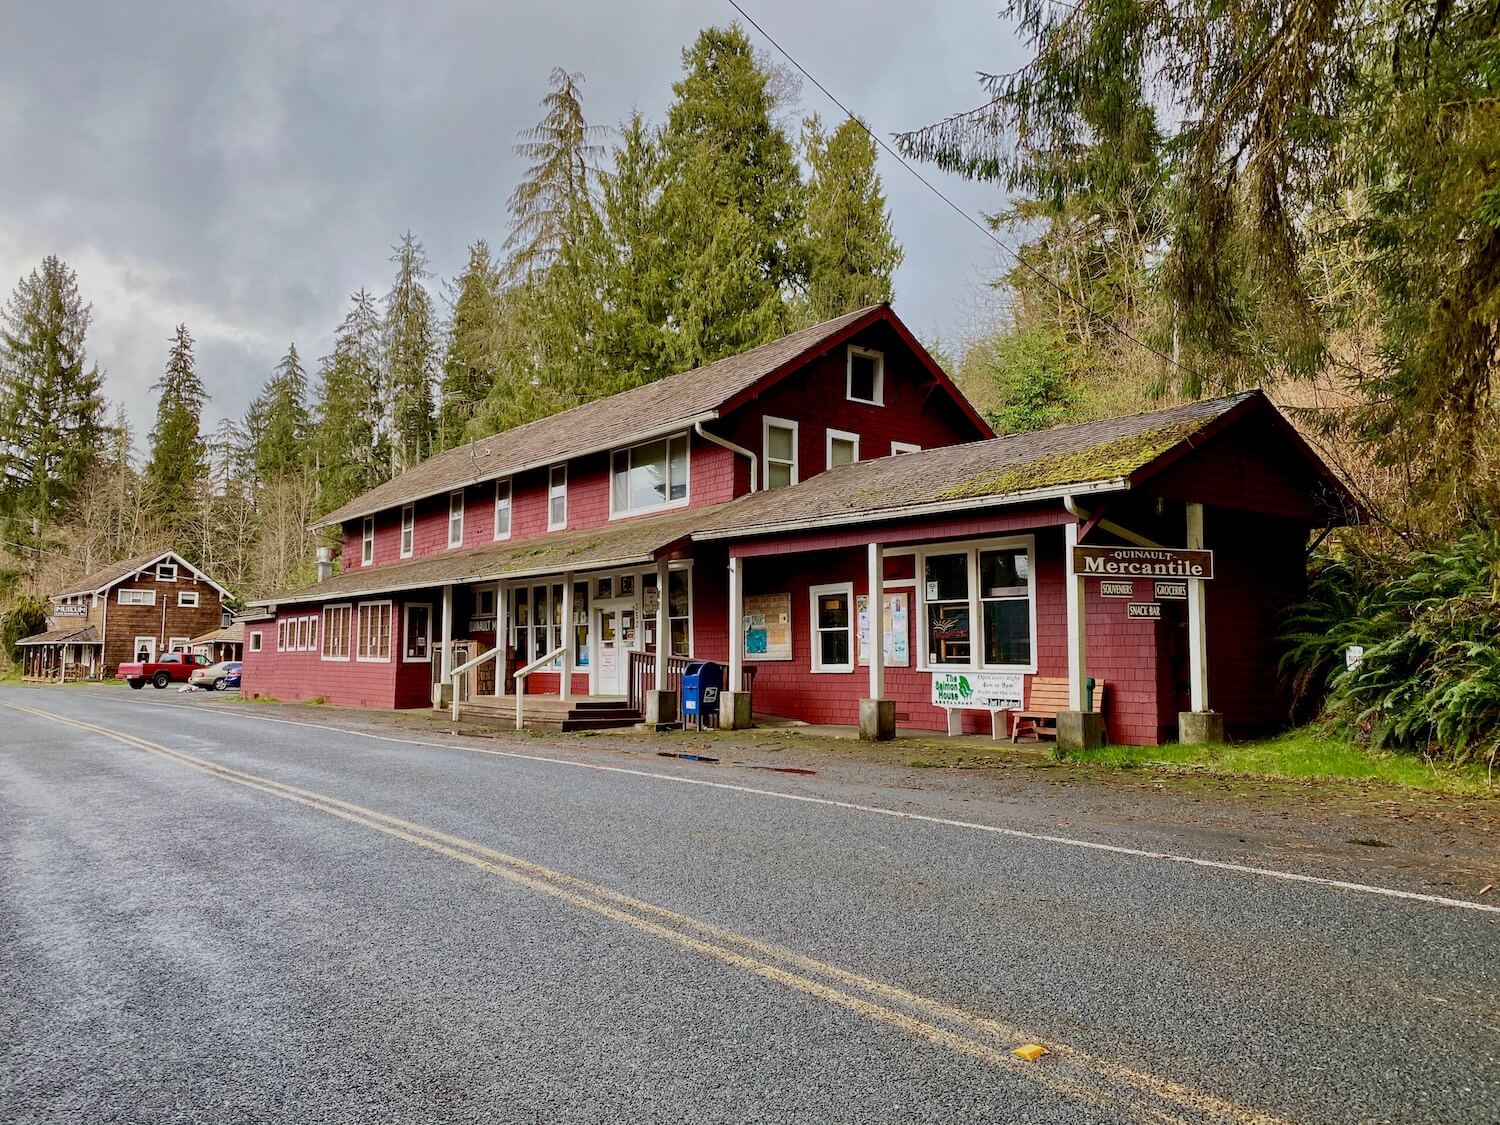 The old mercantile wears bright red paint well and the color pops against white trim. This 1930s era building hugs the side of the main paved road, with a yellow line down the middle. The background shows a gray sky heavy with potential rain.